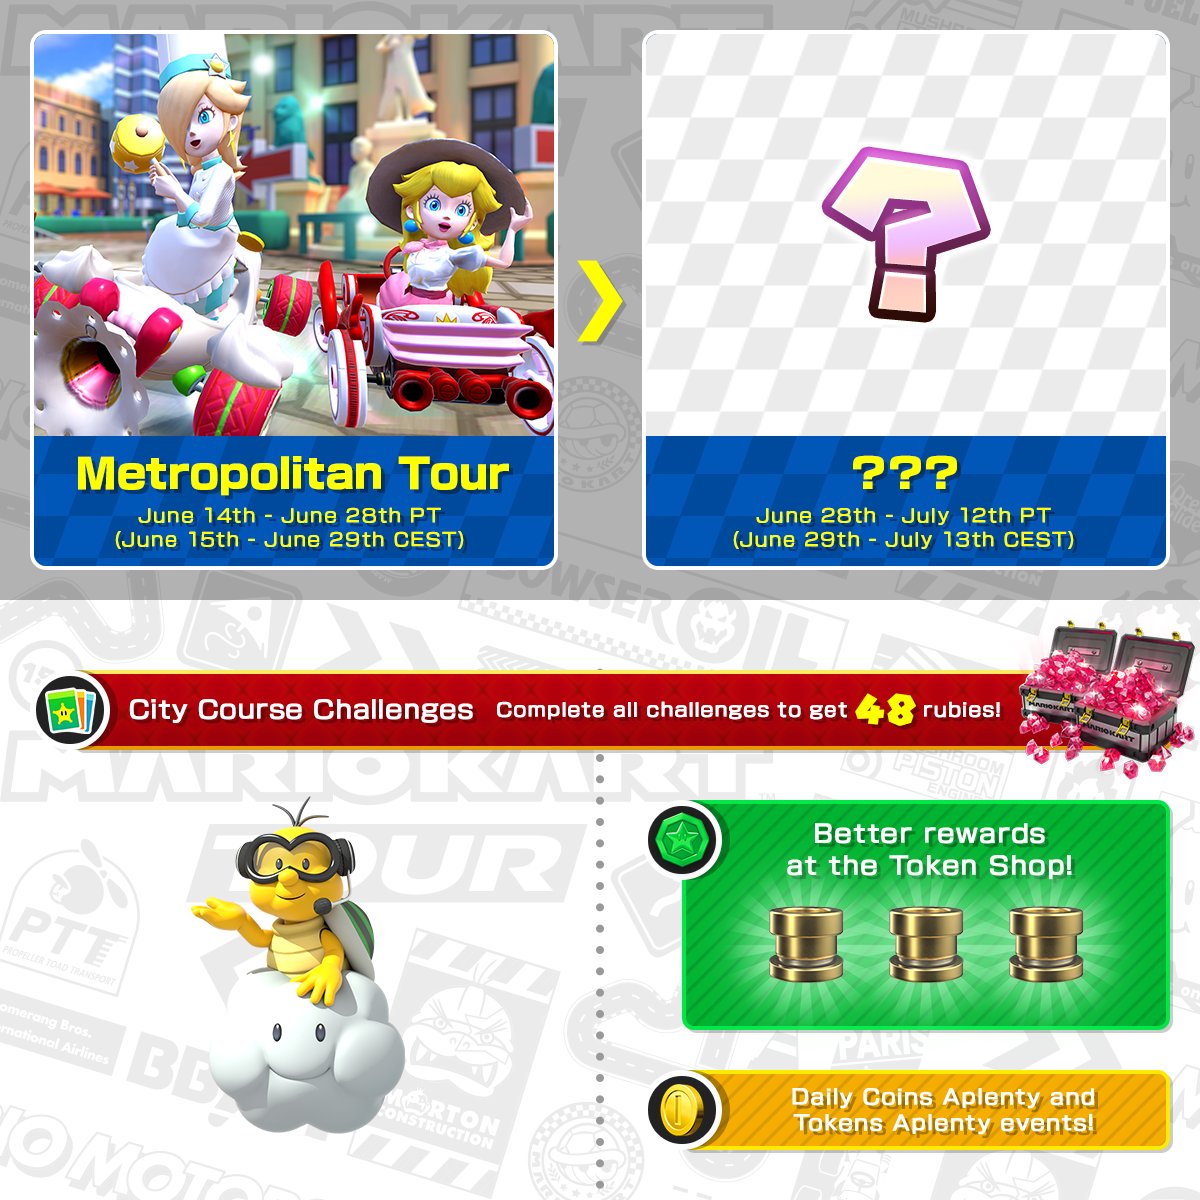 broderi Compulsion Lad os gøre det Mario Kart Tour on Twitter: "The two-tour Metropolitan Fest event starts in  #MarioKartTour! Check the image for more details! https://t.co/Phi3Z22mSx"  / Twitter